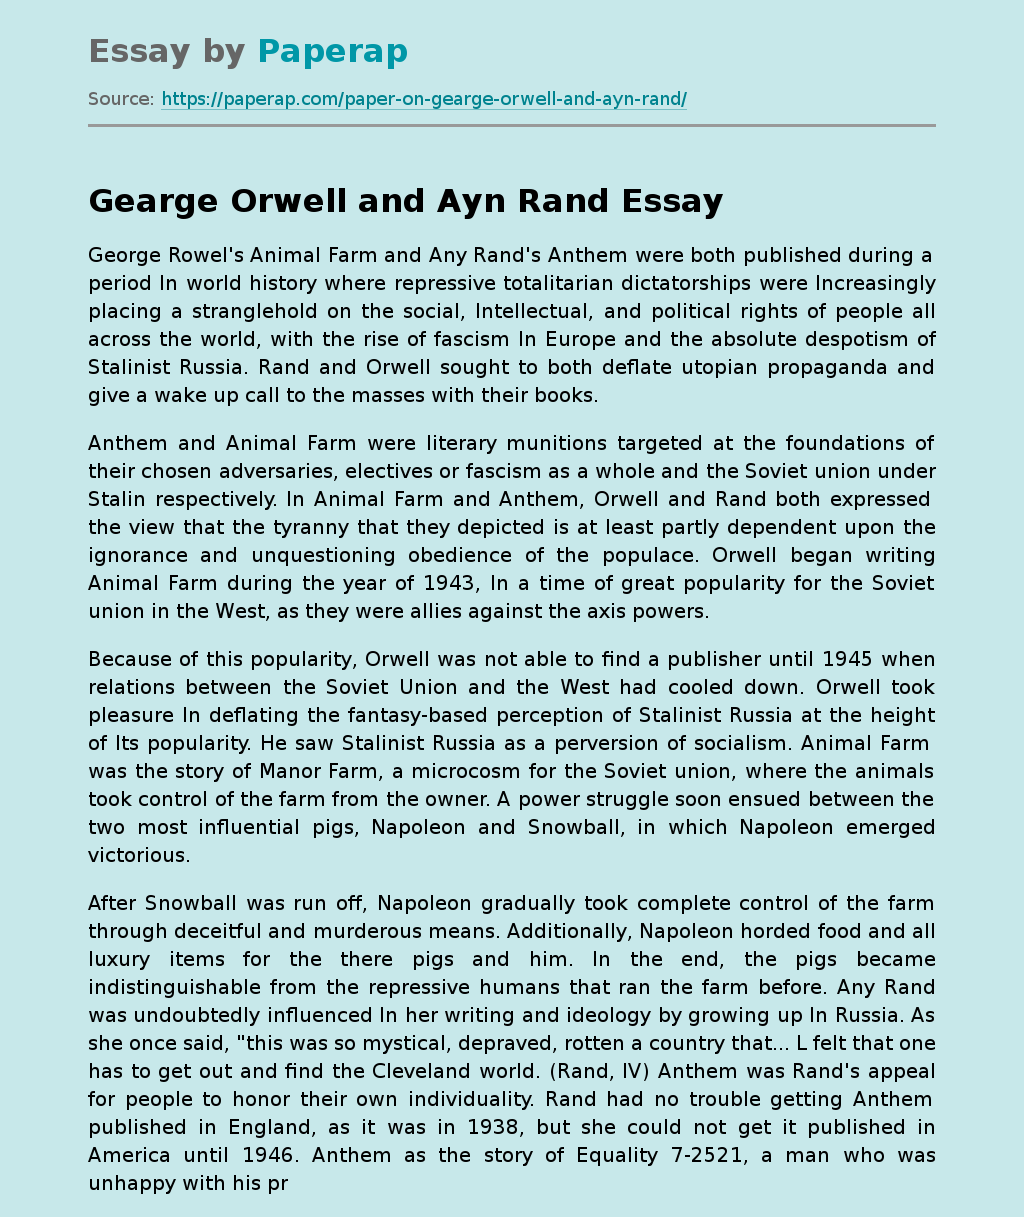 Gearge Orwell and Ayn Rand